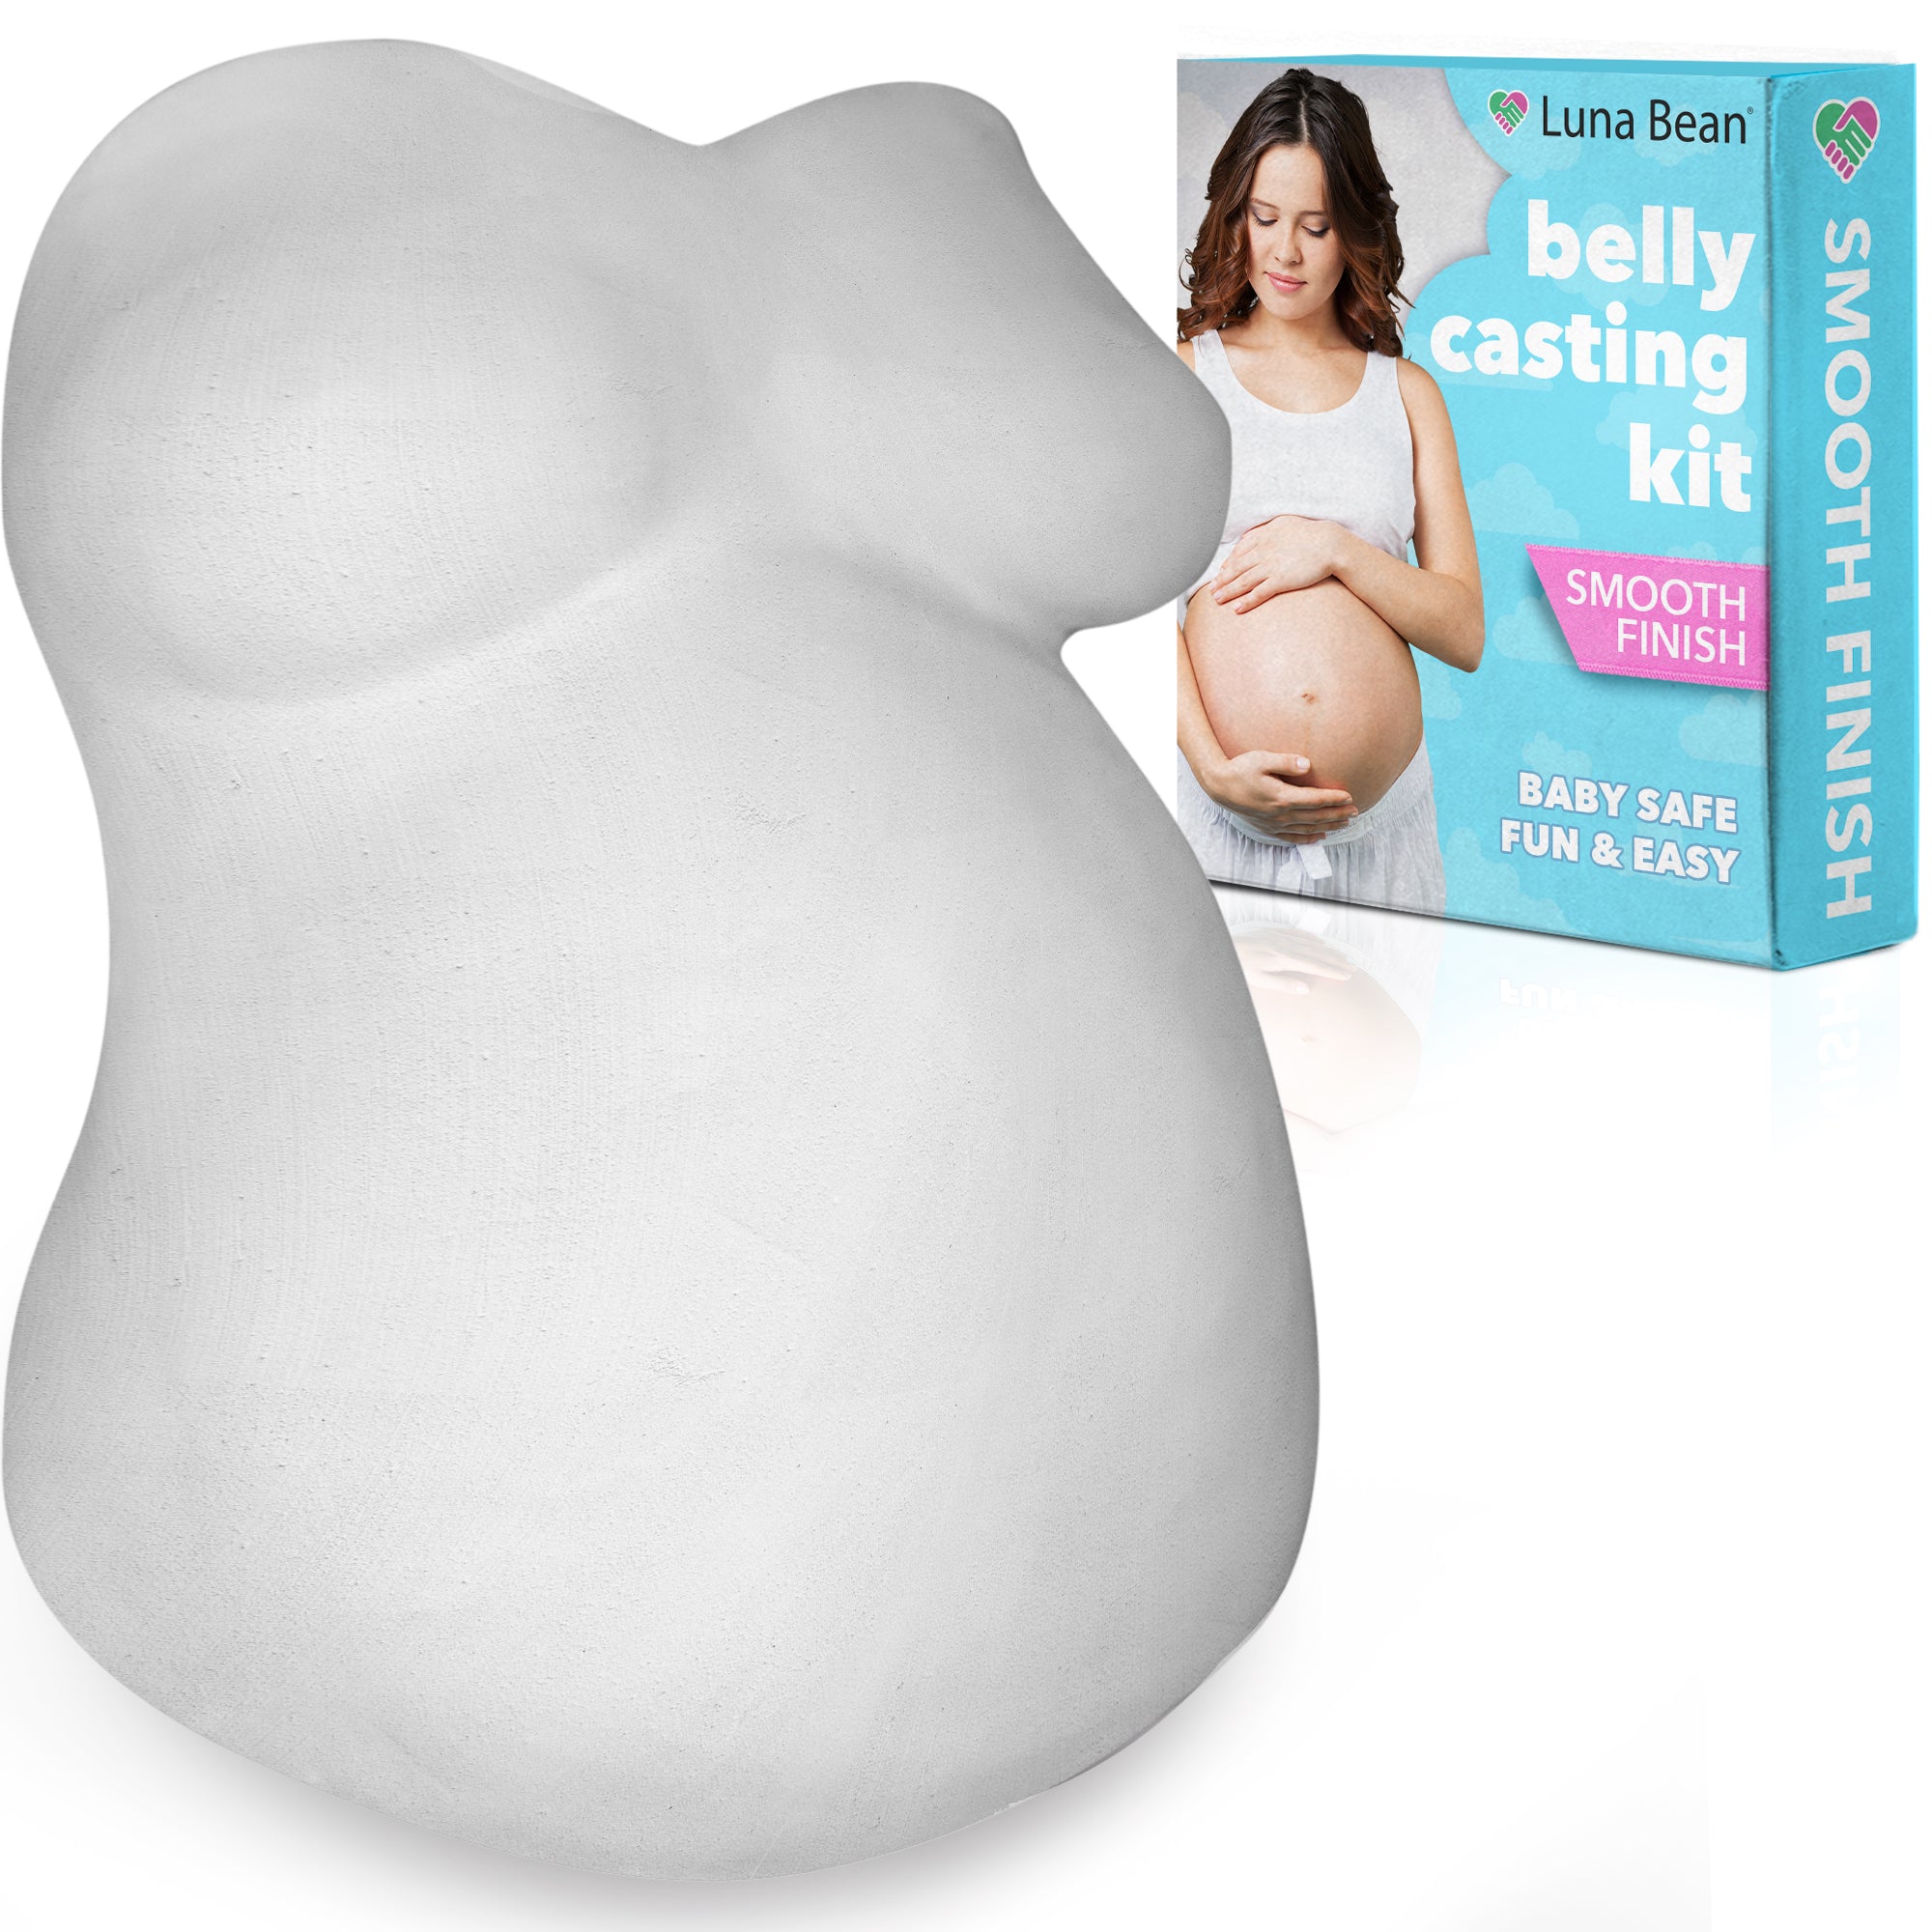 crawl Story Belly cast Kit Pregnancy-Baby casting kit With 5-Plaster cloth  Roll, Hanging Hardware & Decorative items Perfect Ba